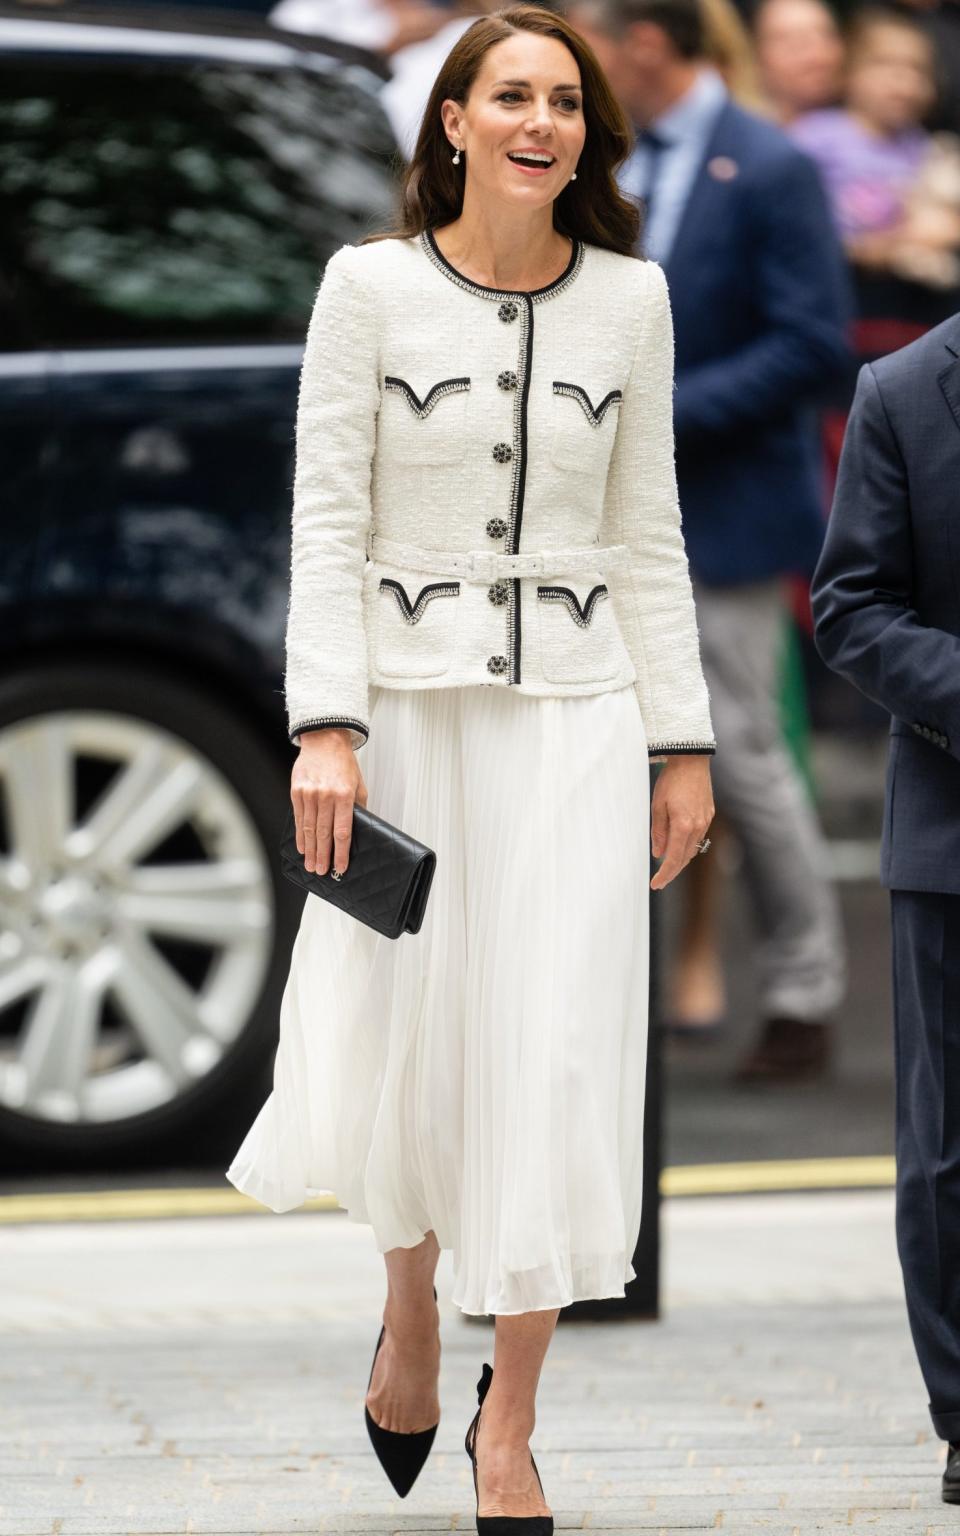 Catherine, Princess of Wales at the reopening of the National Portrait Gallery on June 20, 2023 in London, England